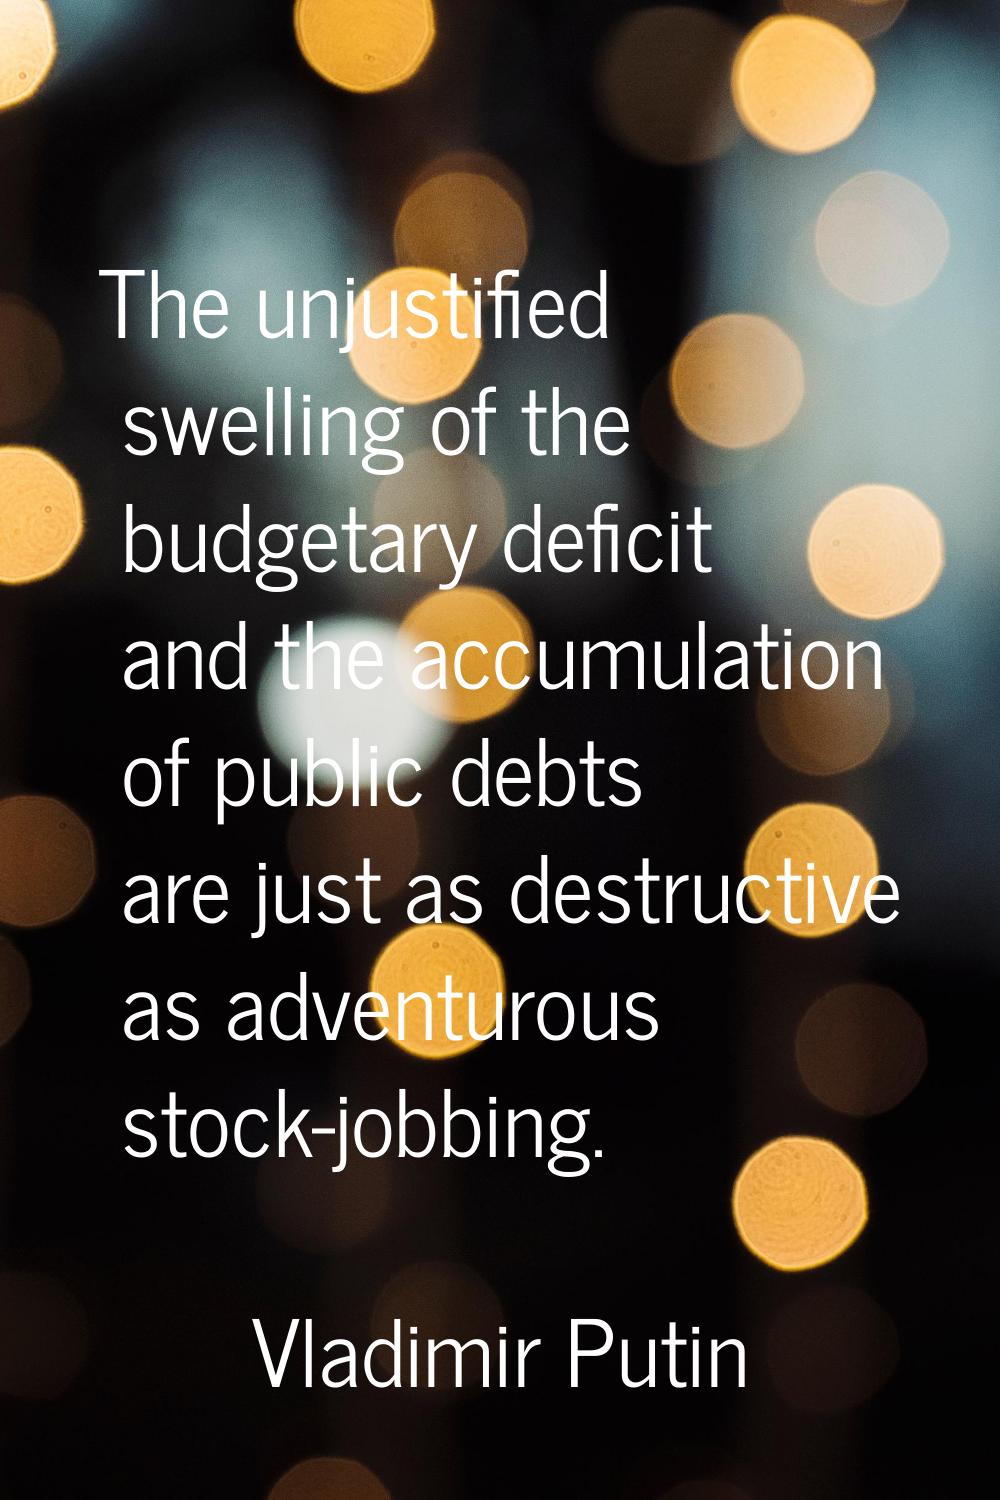 The unjustified swelling of the budgetary deficit and the accumulation of public debts are just as 